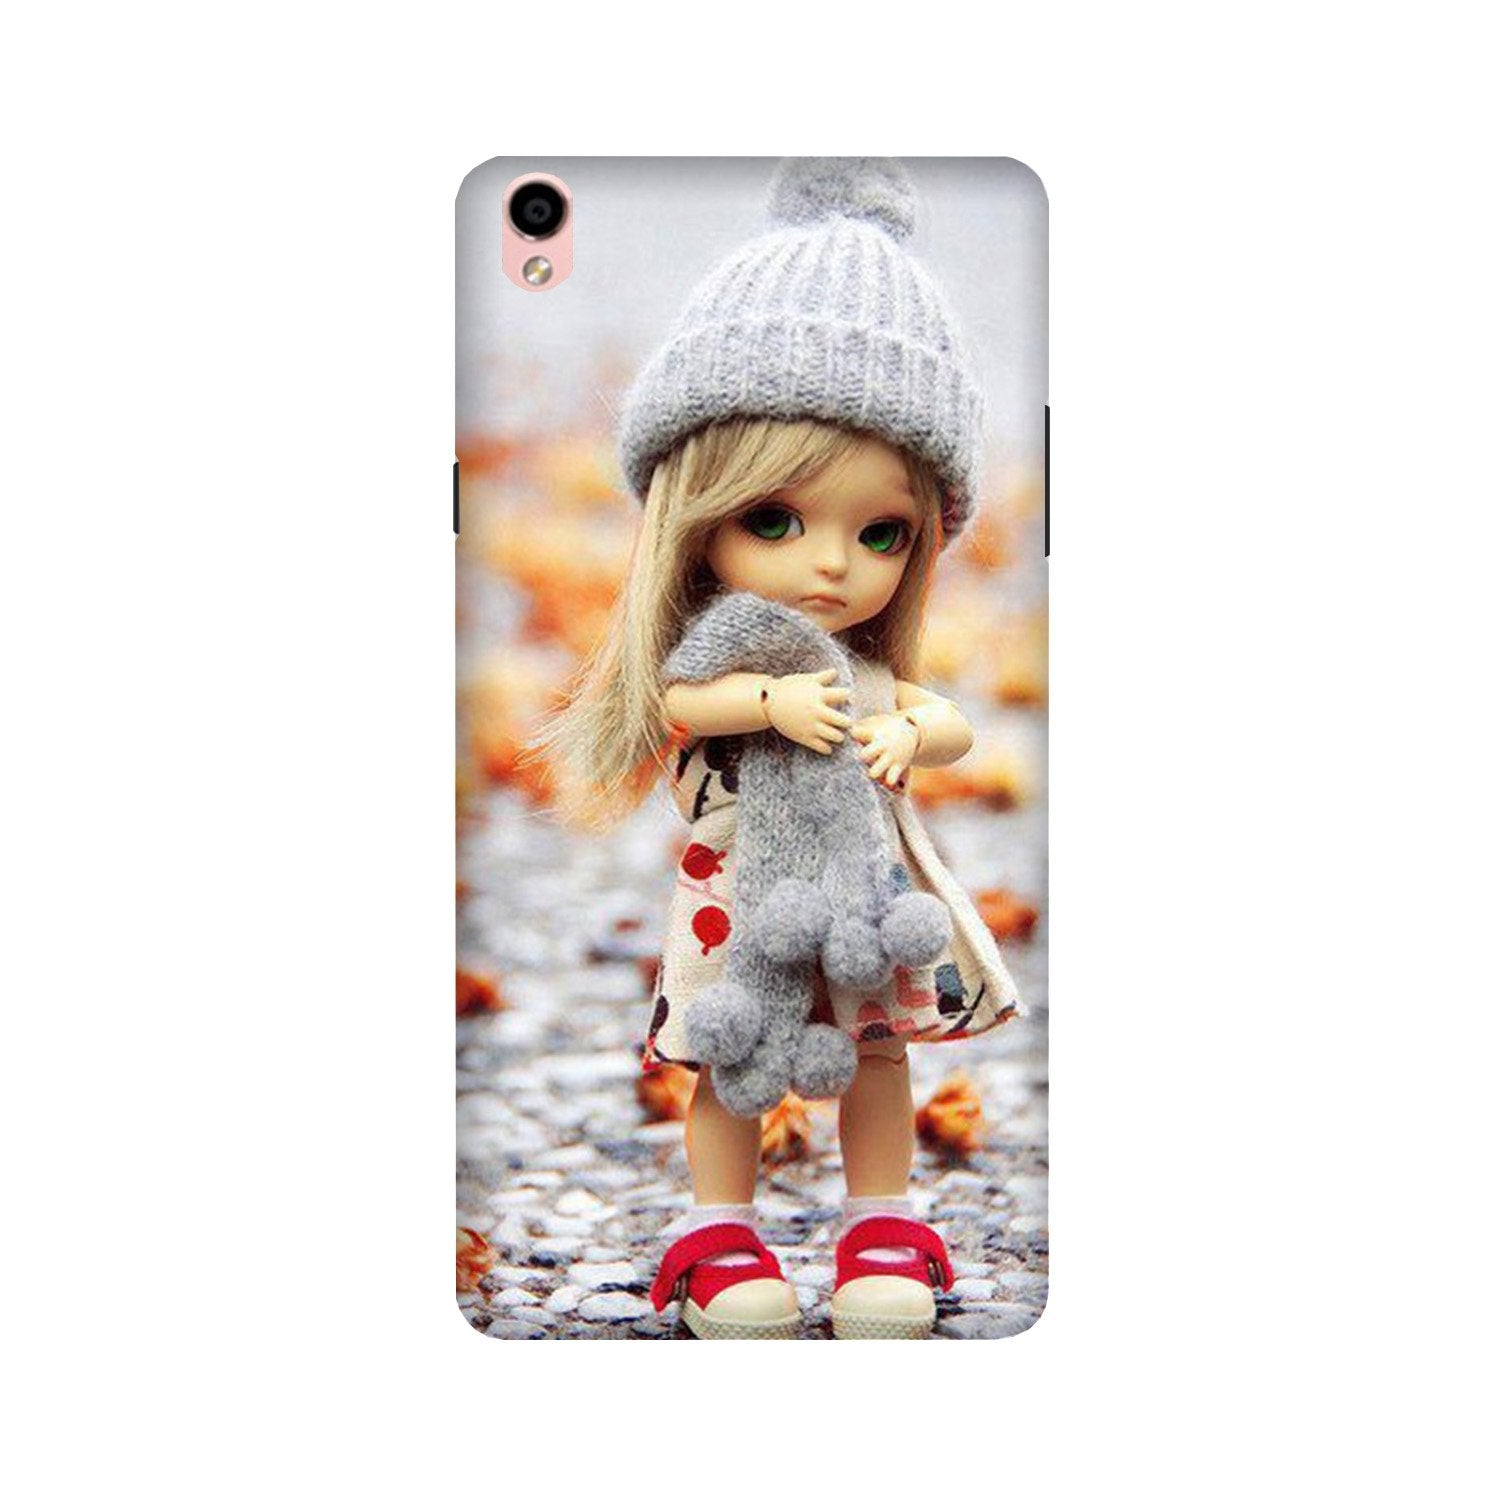 Cute Doll Case for Oppo F1 Plus